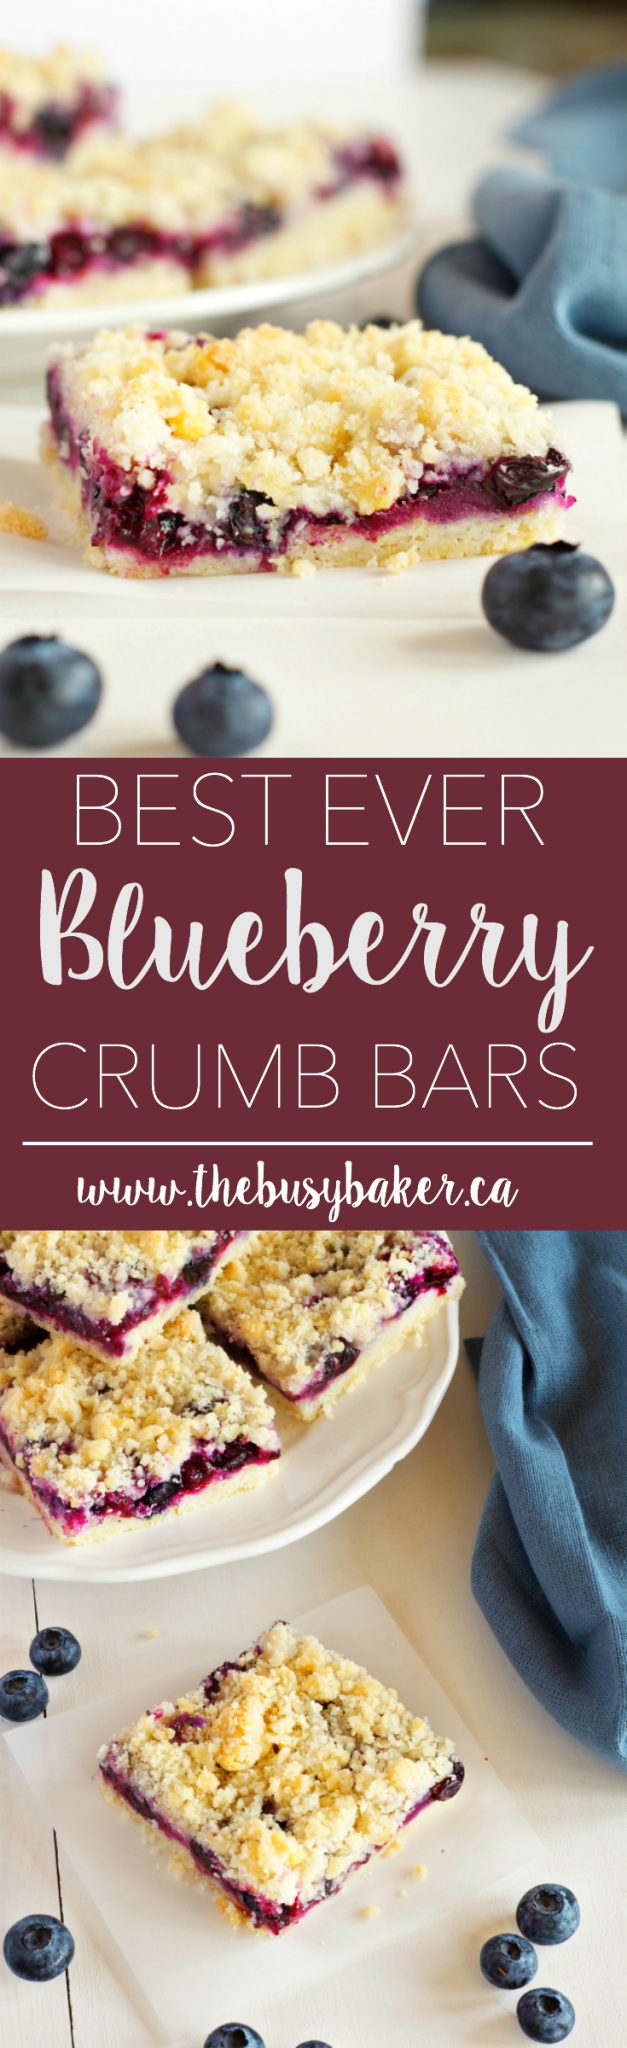 Made with fresh blueberries and a delicious shortbread-style streusel topping, these Blueberry Crumb Bars are irresistible! thebusybaker.ca via @busybakerblog